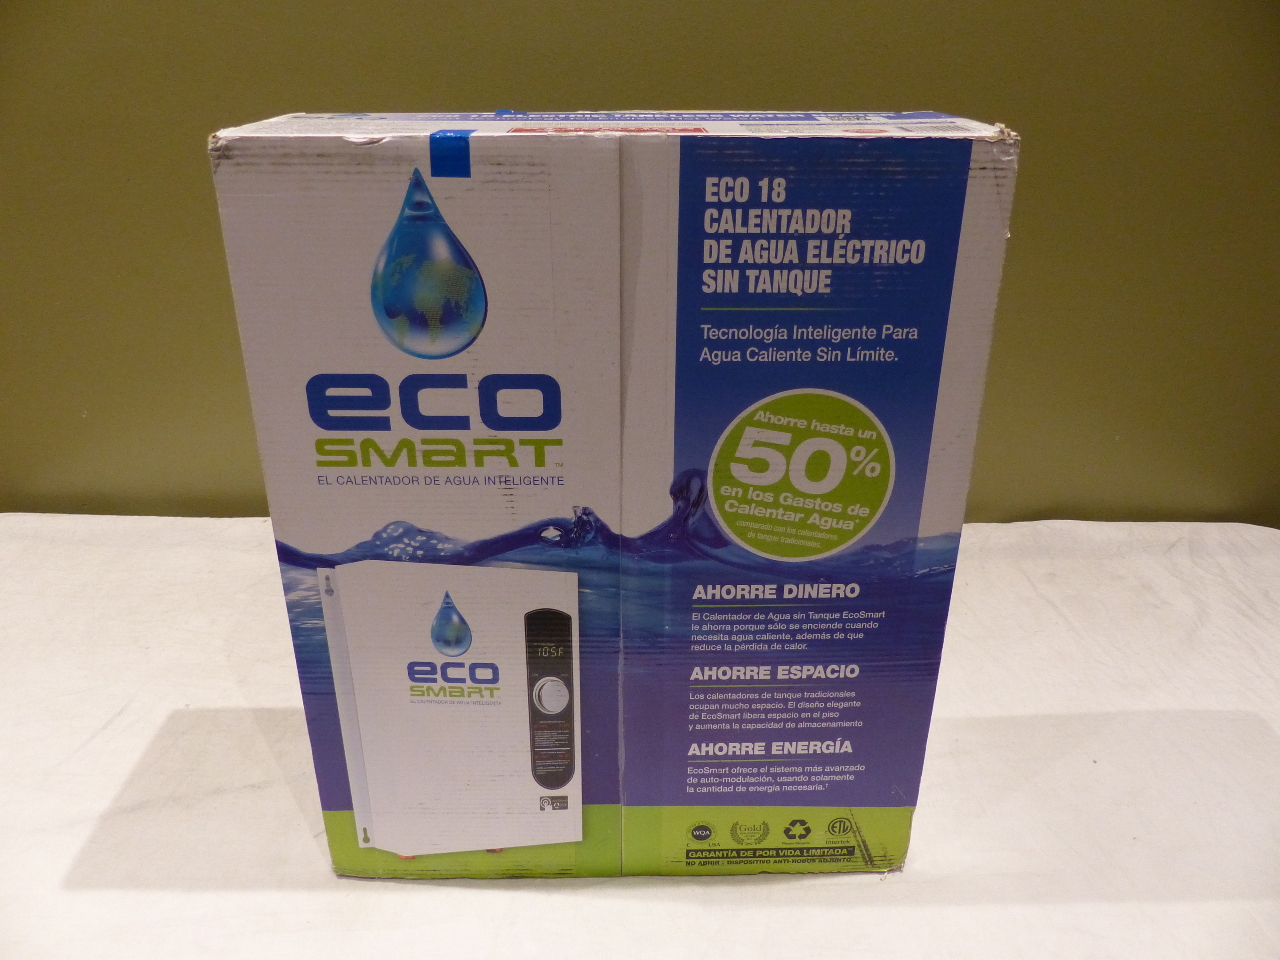 Ecosmart Electric Tankless Water Heater 18 Kw 240 V 4367645 Eco18